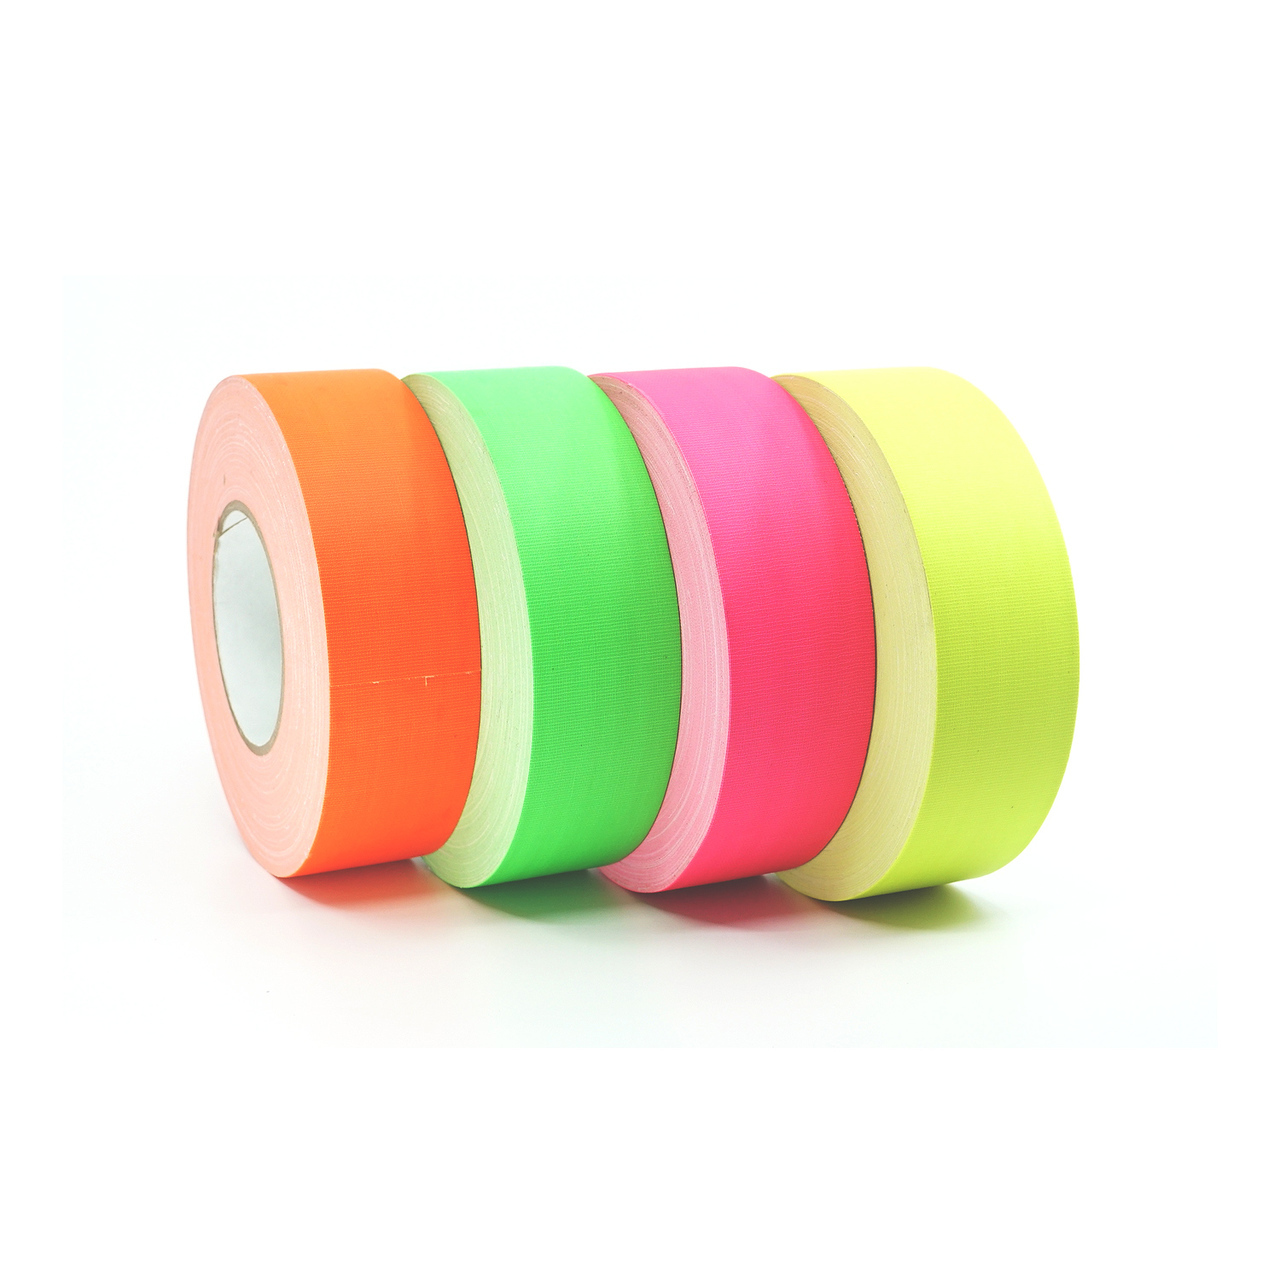 DOT-C2 Reflective Conspicuity Tape (V92308)